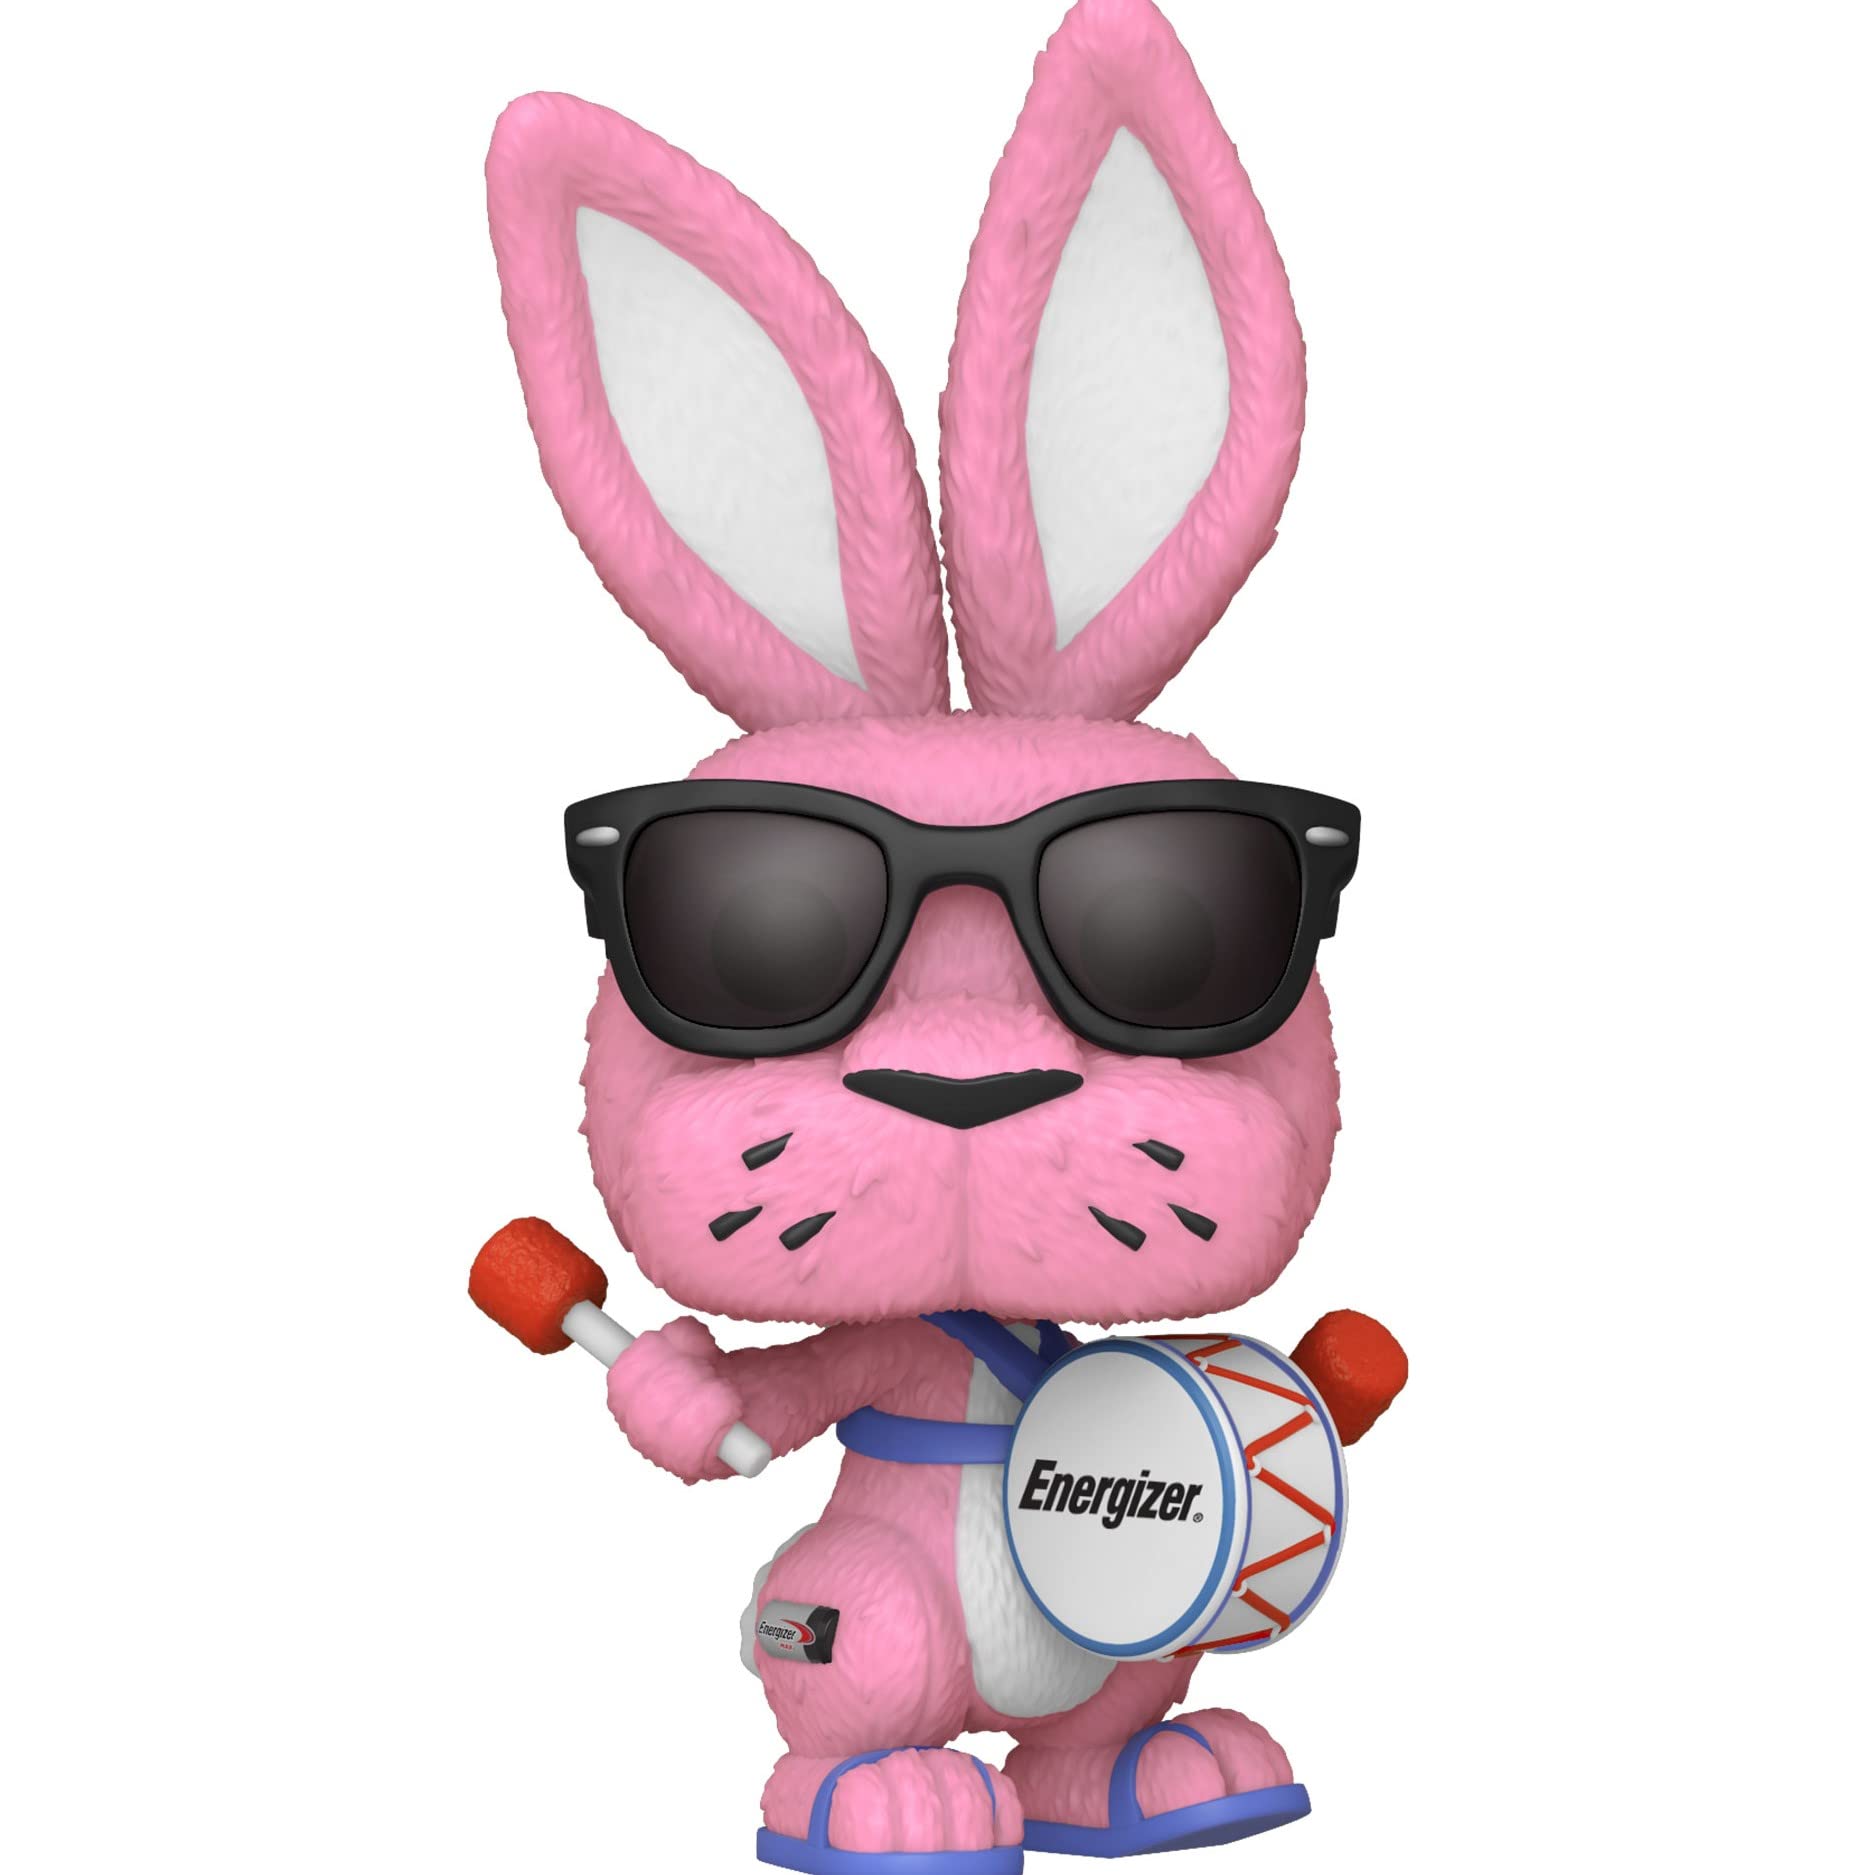 The Energizer Bunny Will Appear BY Funko Pop!